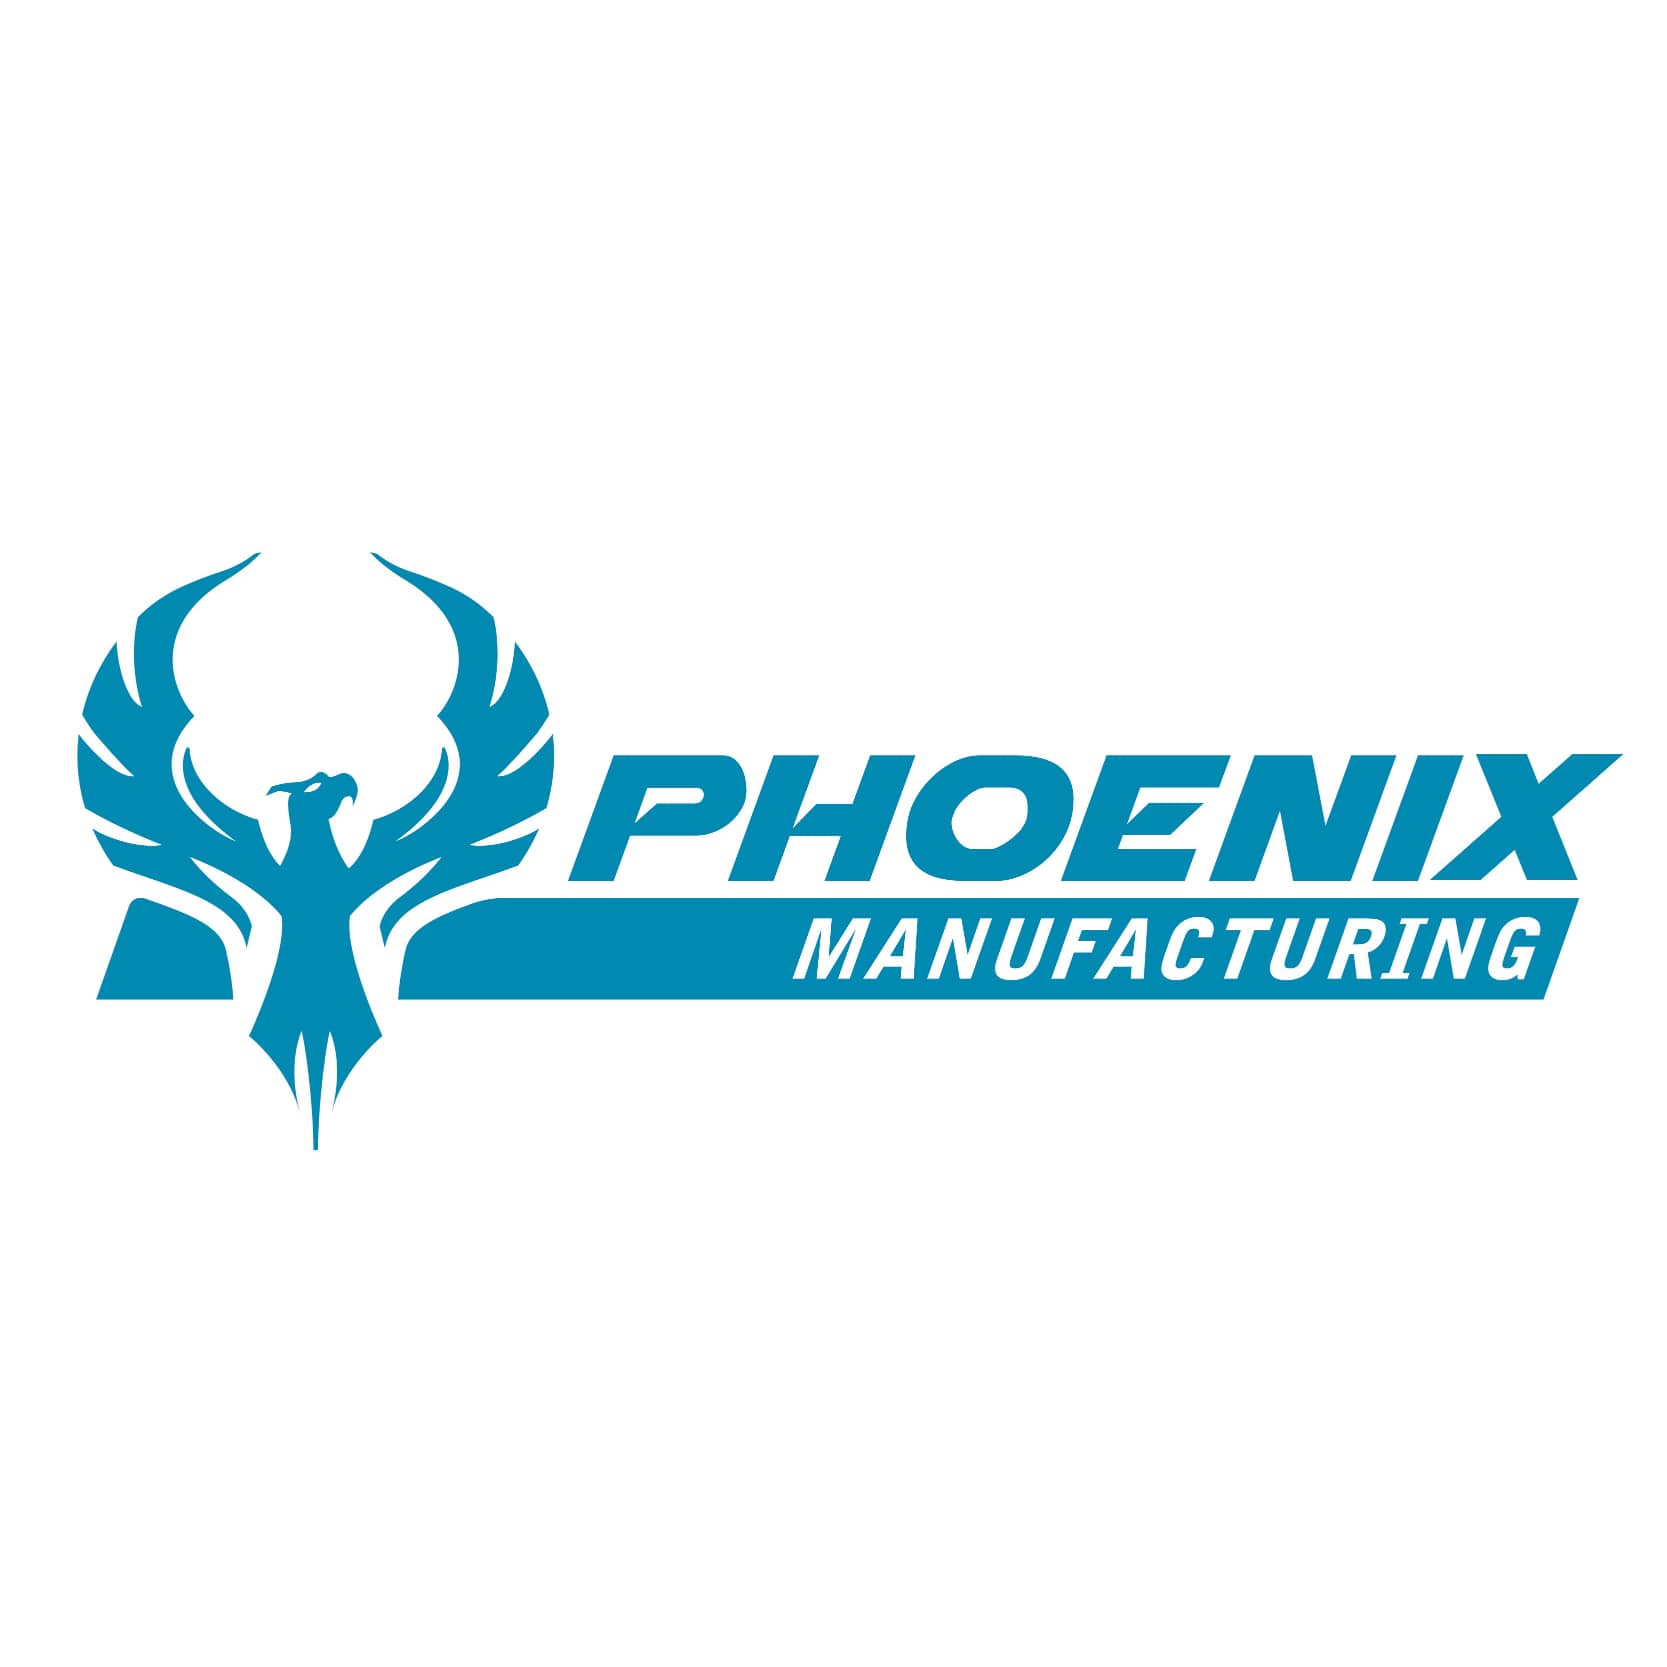 Phoenix Manufacturing Welcomes Scott Morling as New President